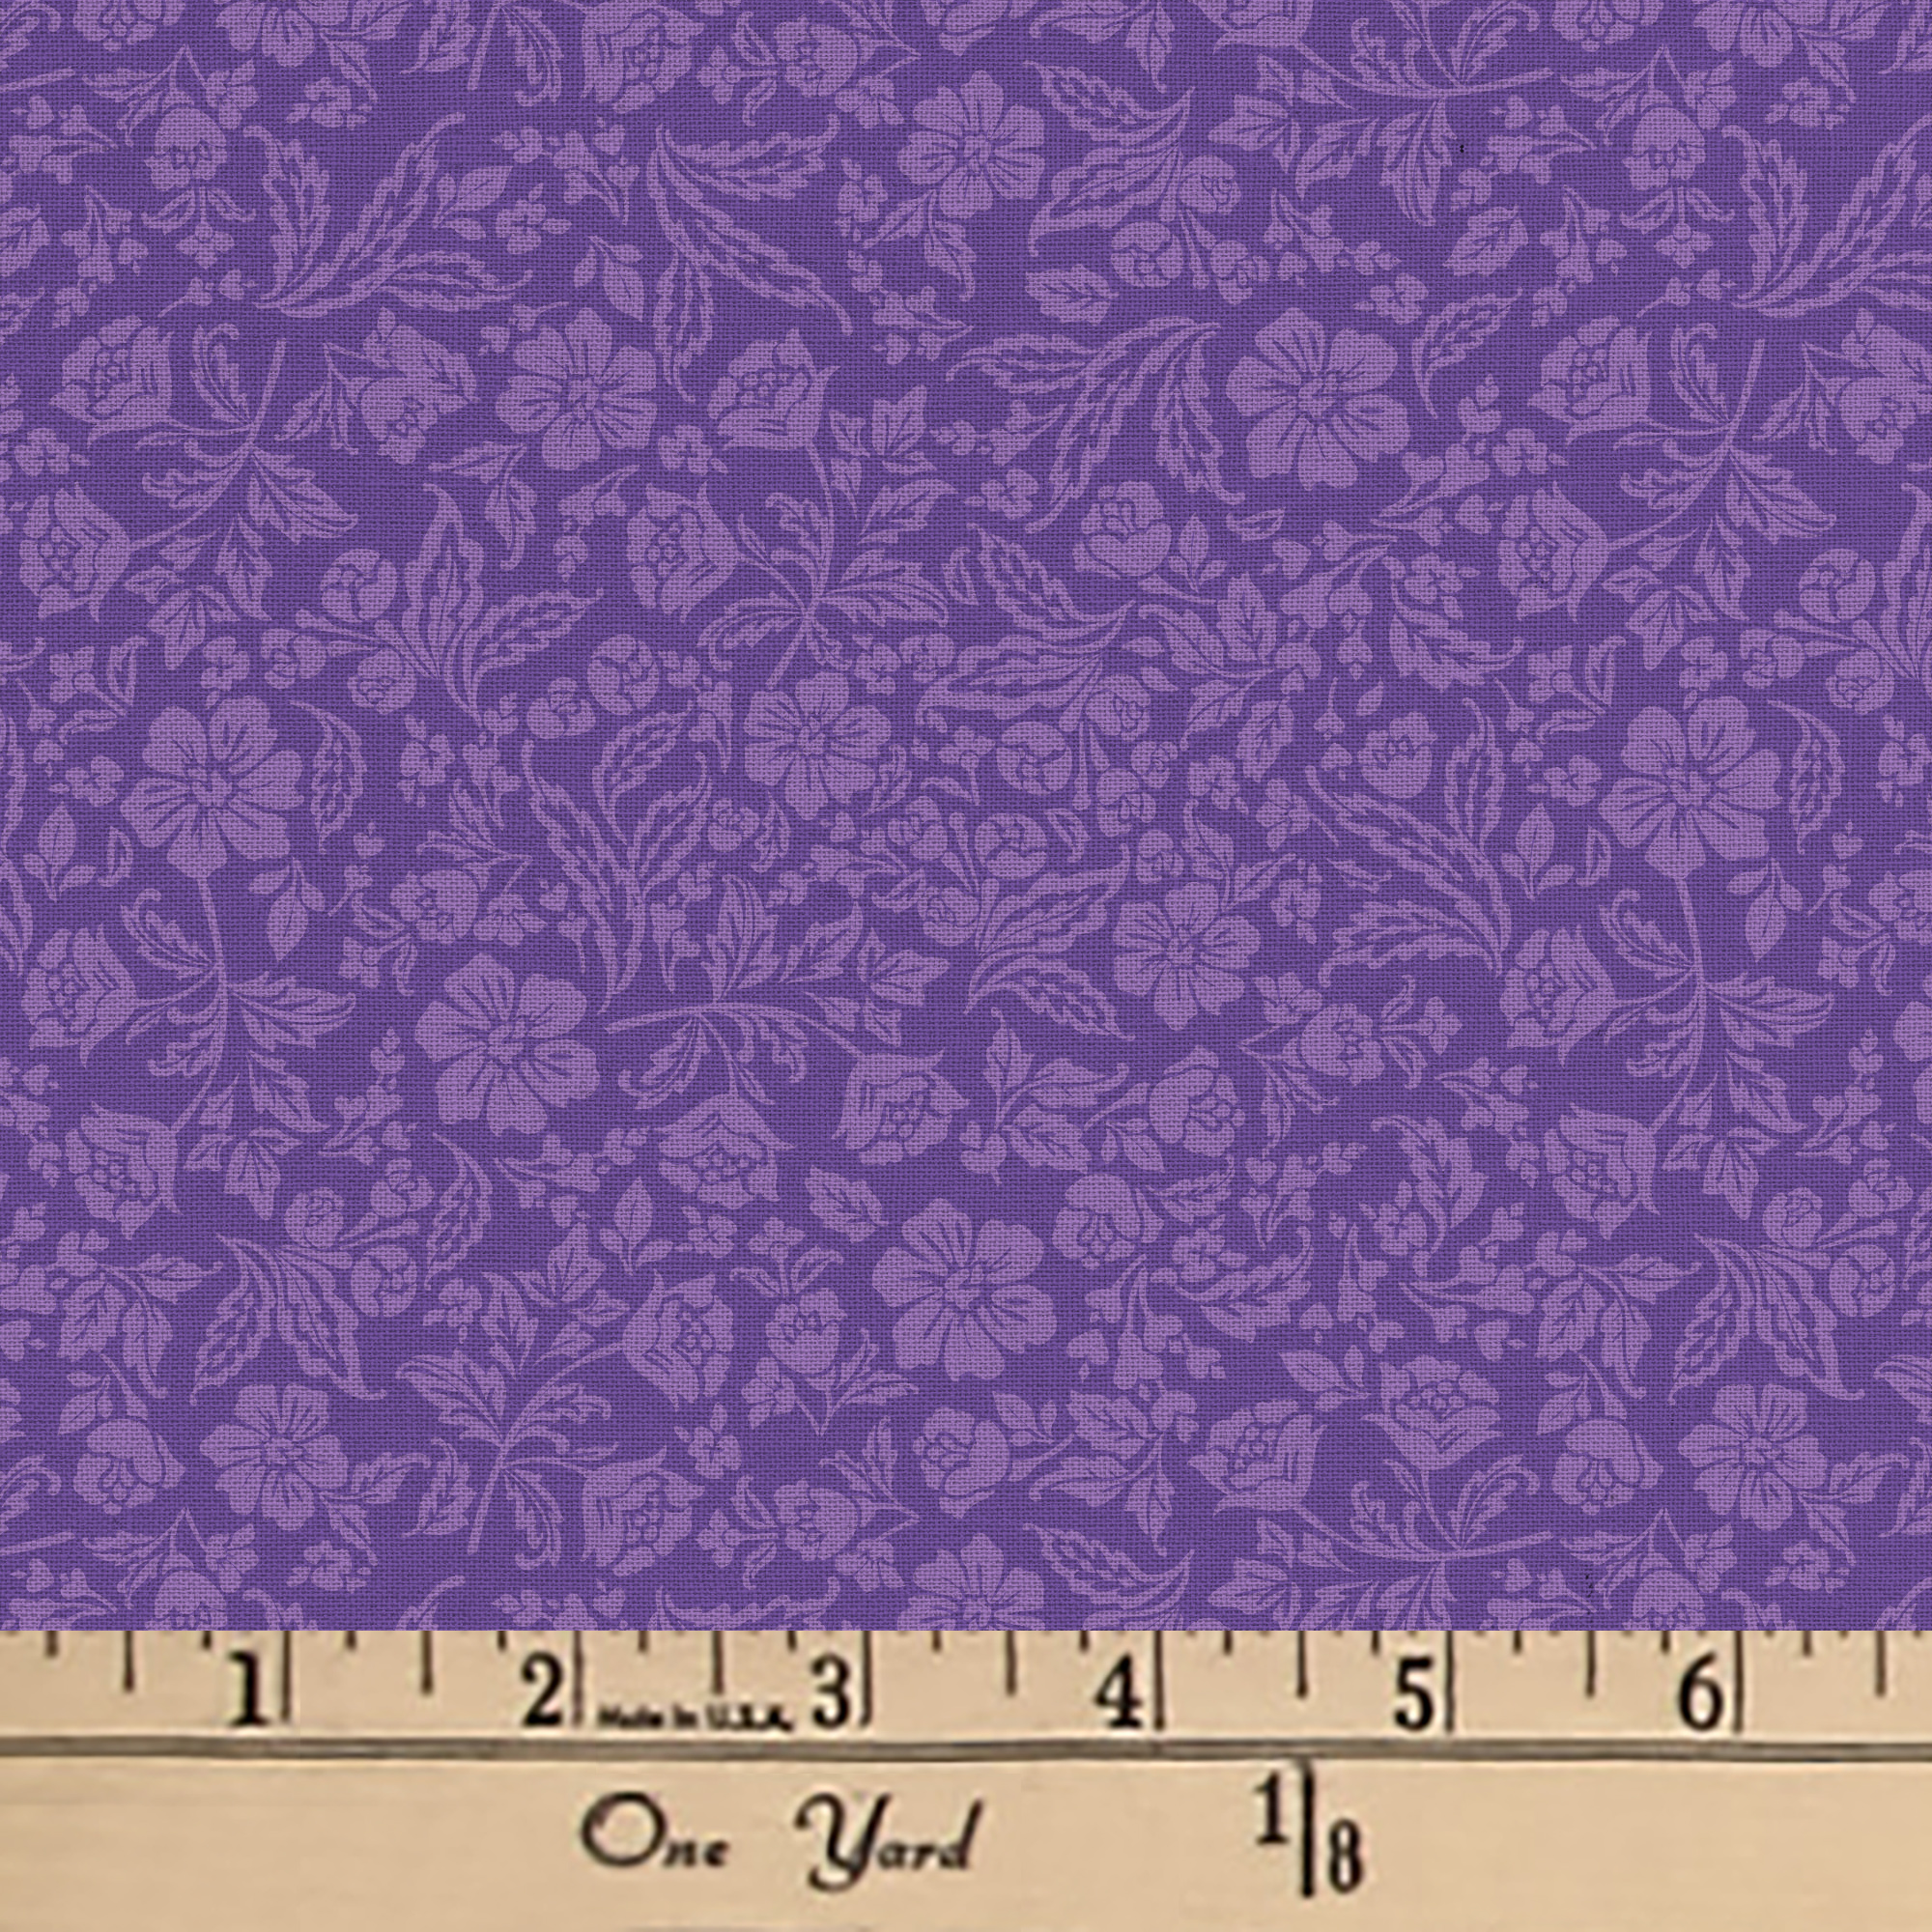 Waverly Inspirations 44" Cotton Paris Floral Coordinate Sewing & Craft Fabric by the Yard, Purple - image 2 of 2